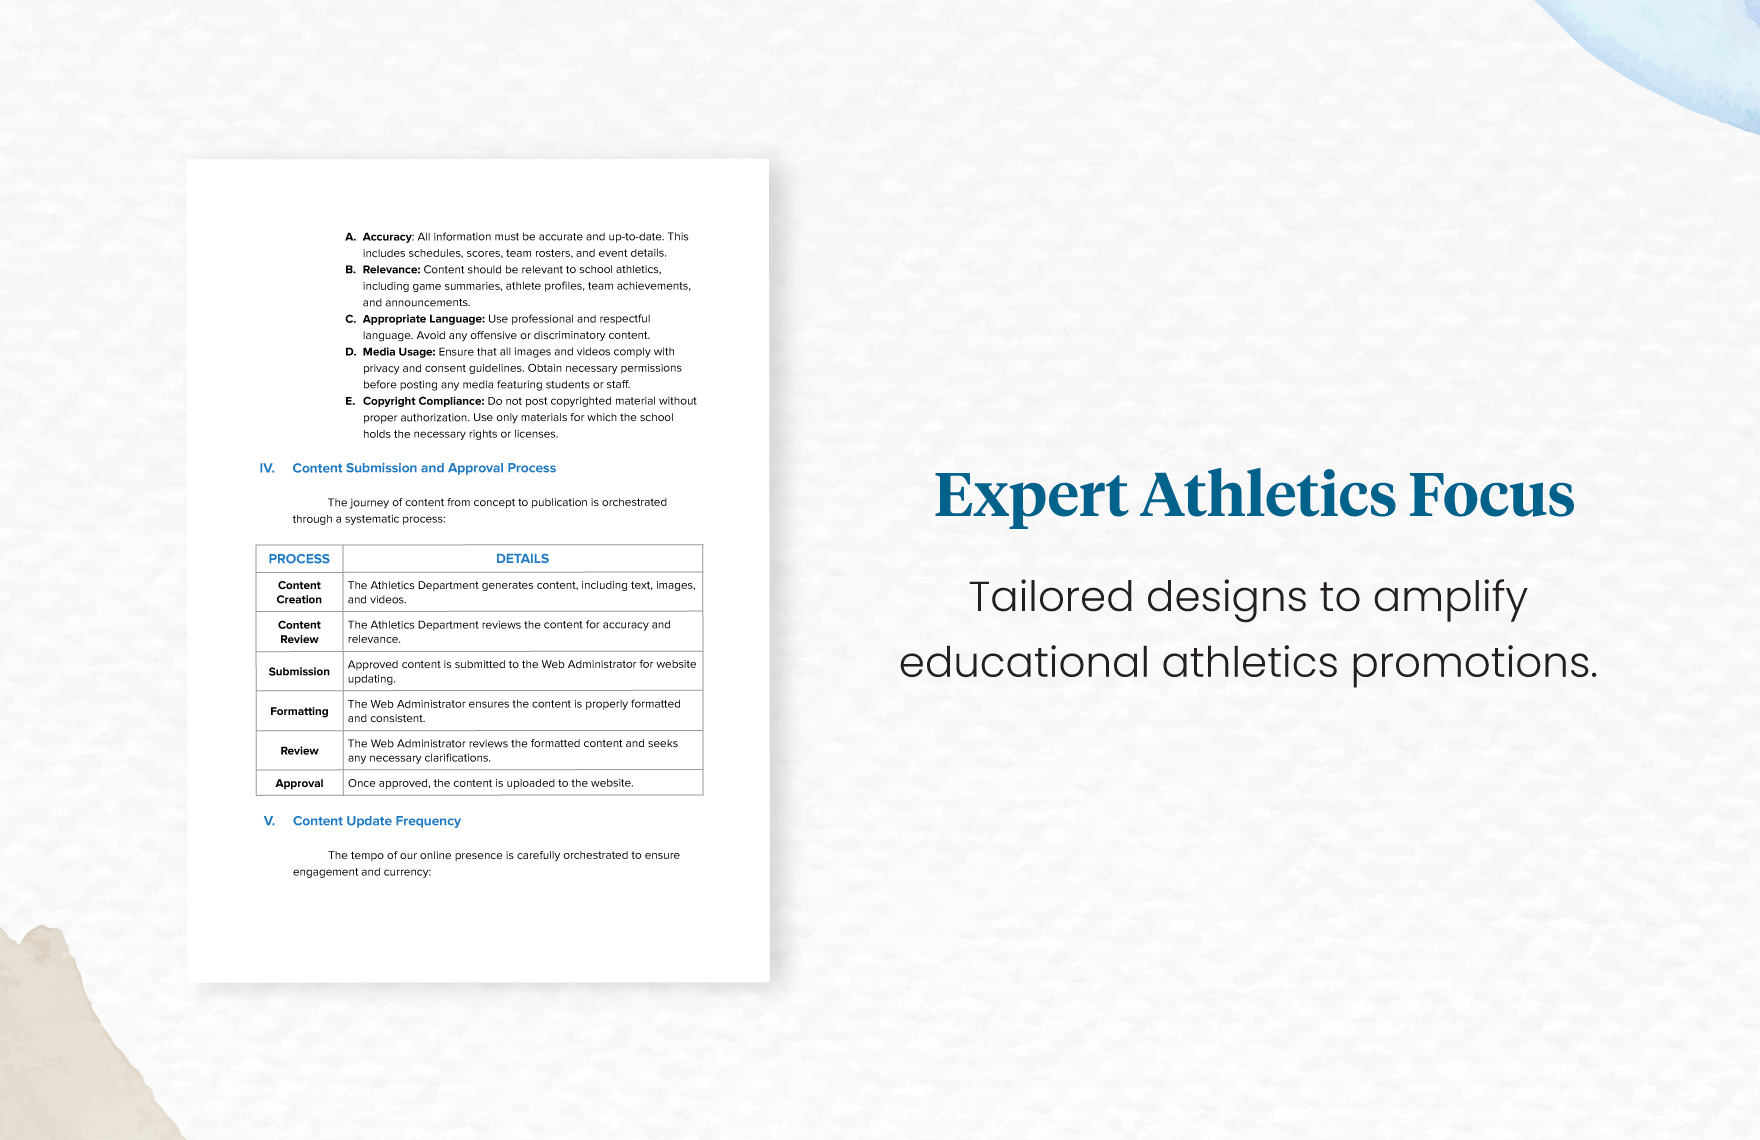 School Athletics Website Content Management Policy Template